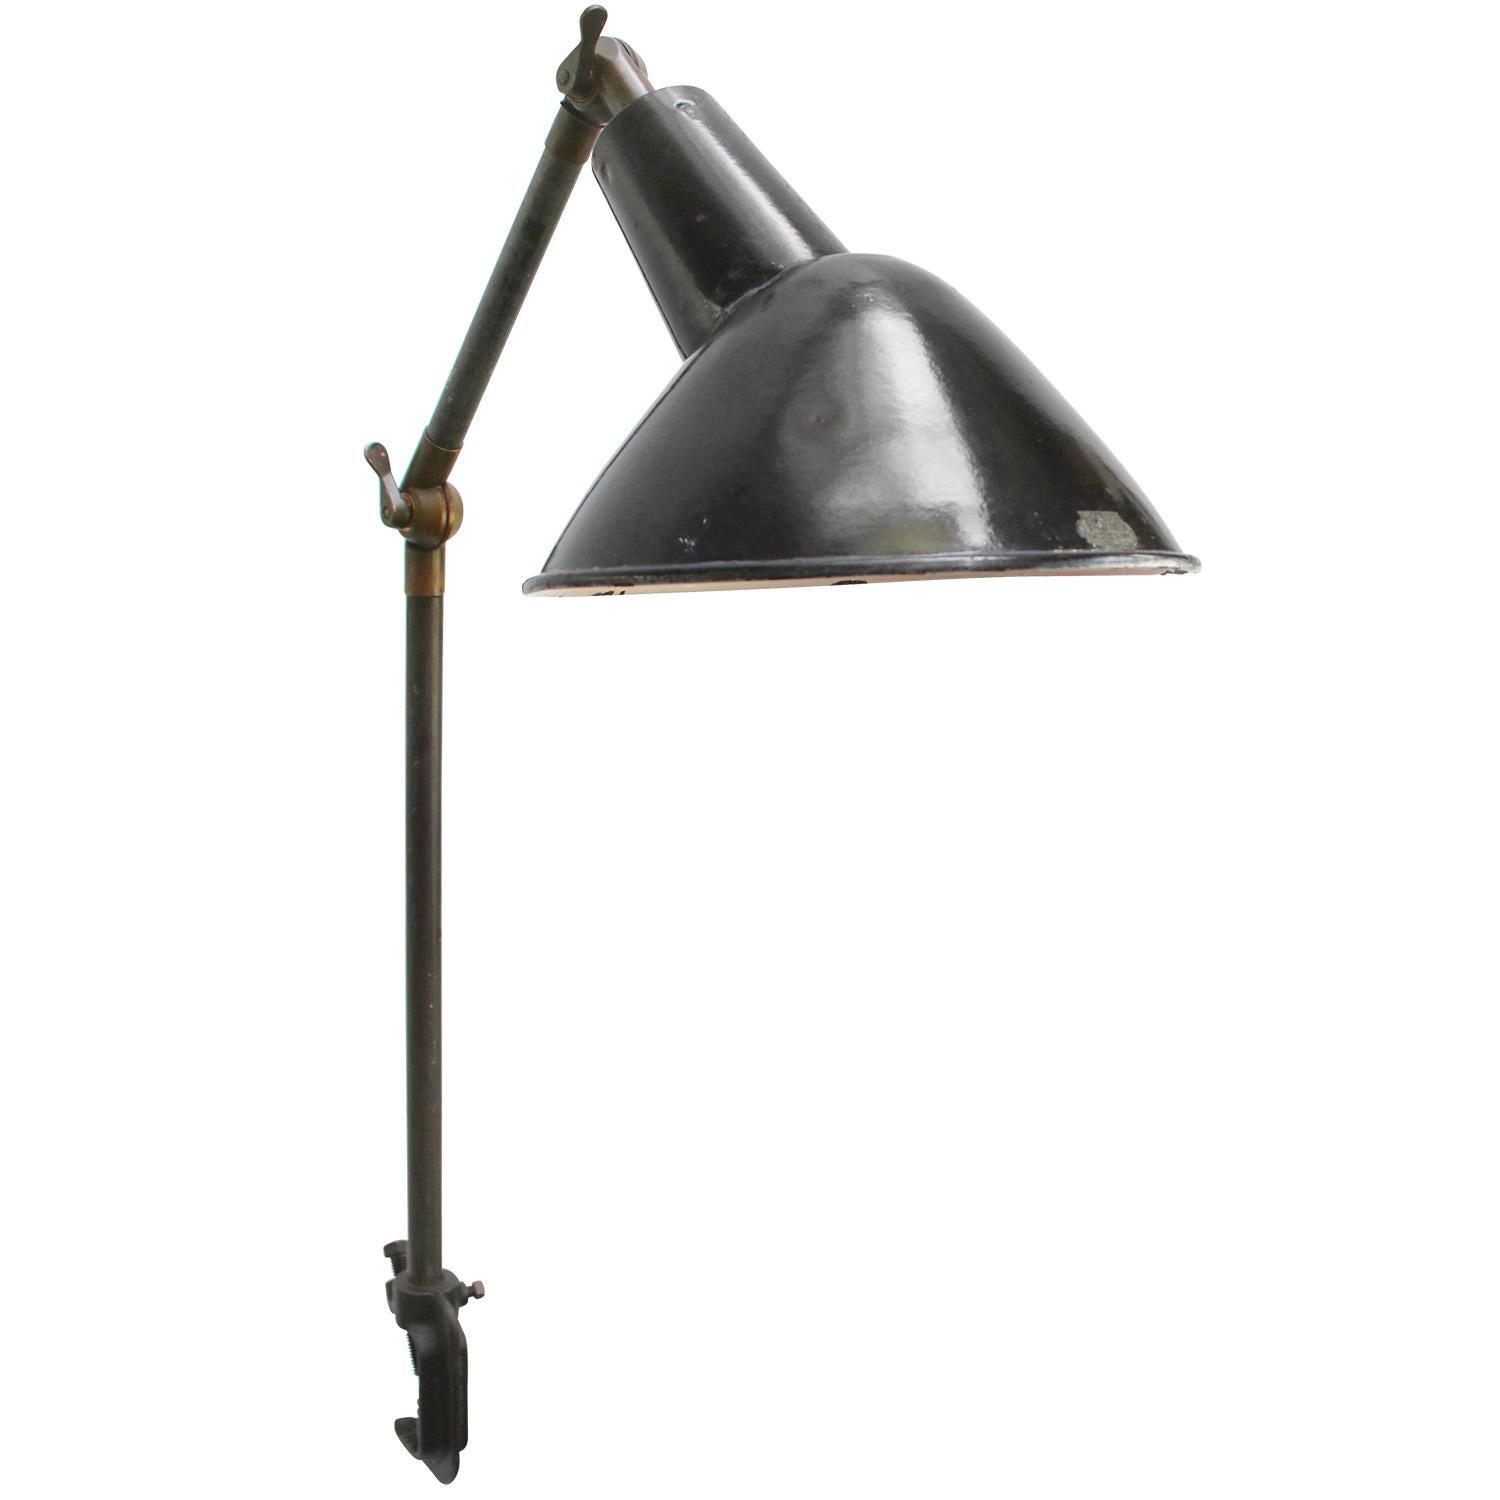 French Holophane Black Enamel Vintage industrial 2-arm machinist work table lamp
Cast iron clamp and arm. Brass joints.
Adjustable in height and angle.
Including plug and switch

Available with UK / US plug

Weight: 3.30 kg / 7.3 lb

Priced per